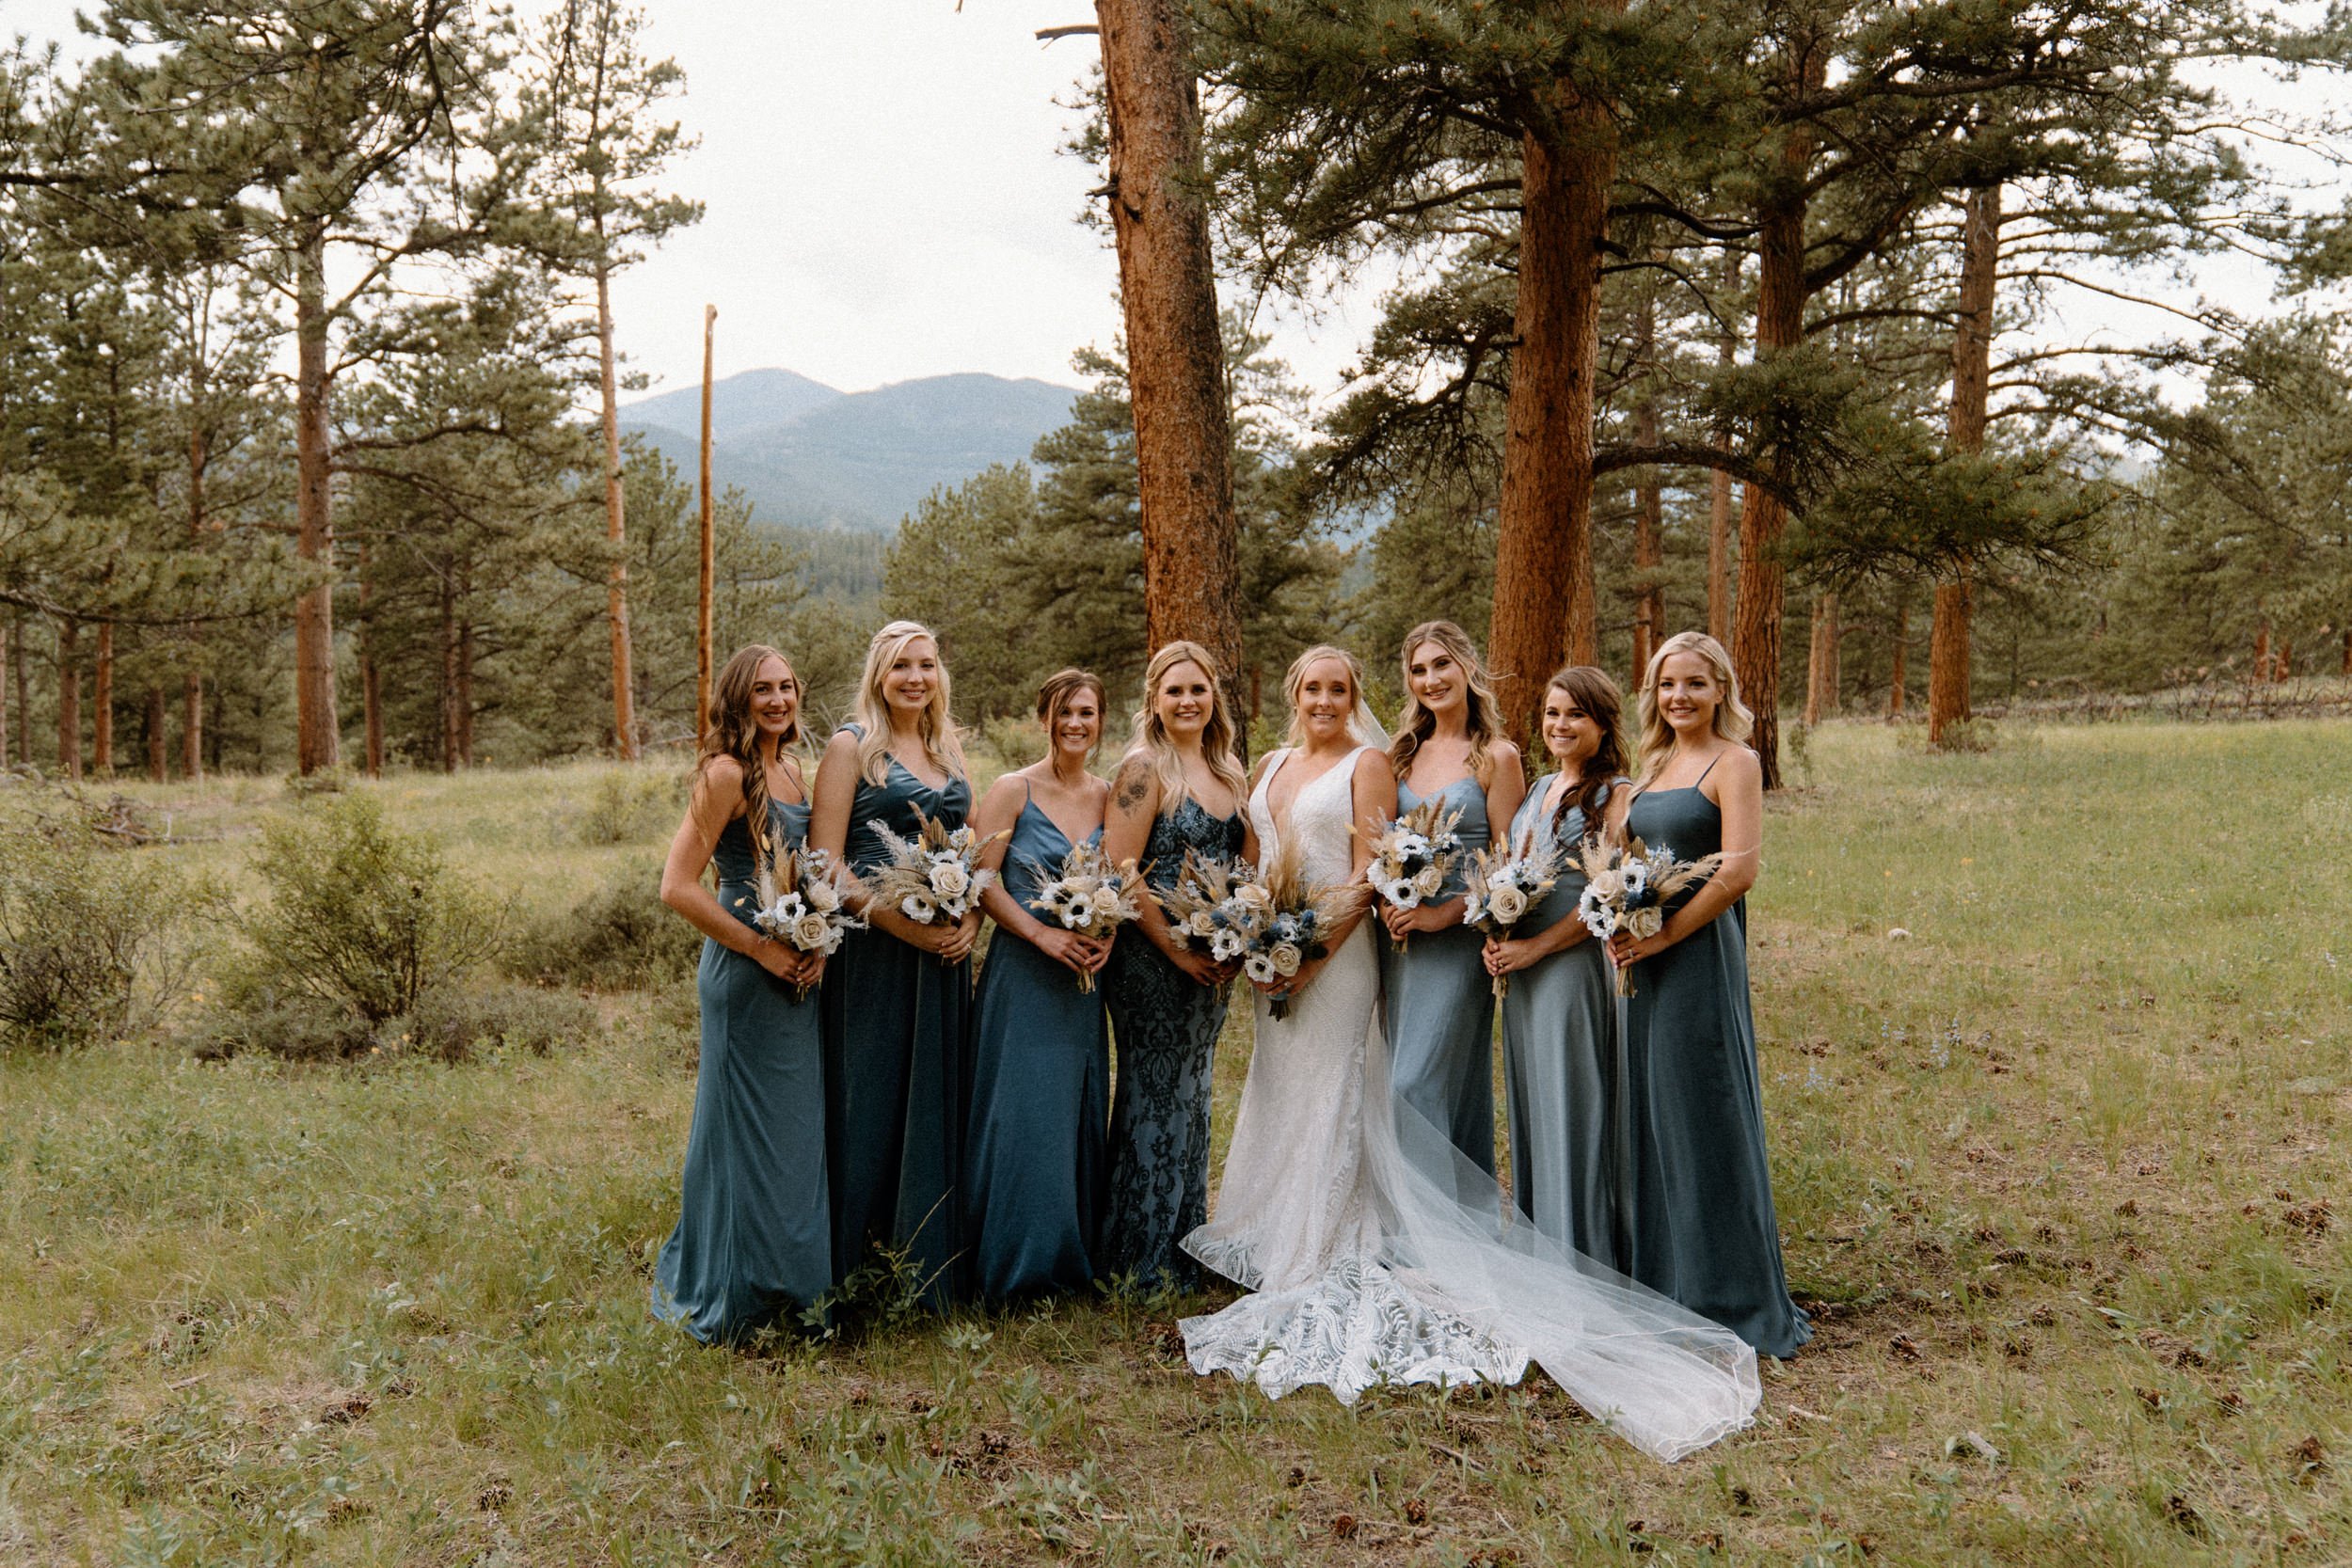 The bride poses with her bridesmaids outside of the Della Terra Mountain Chateau in Estes Park, CO